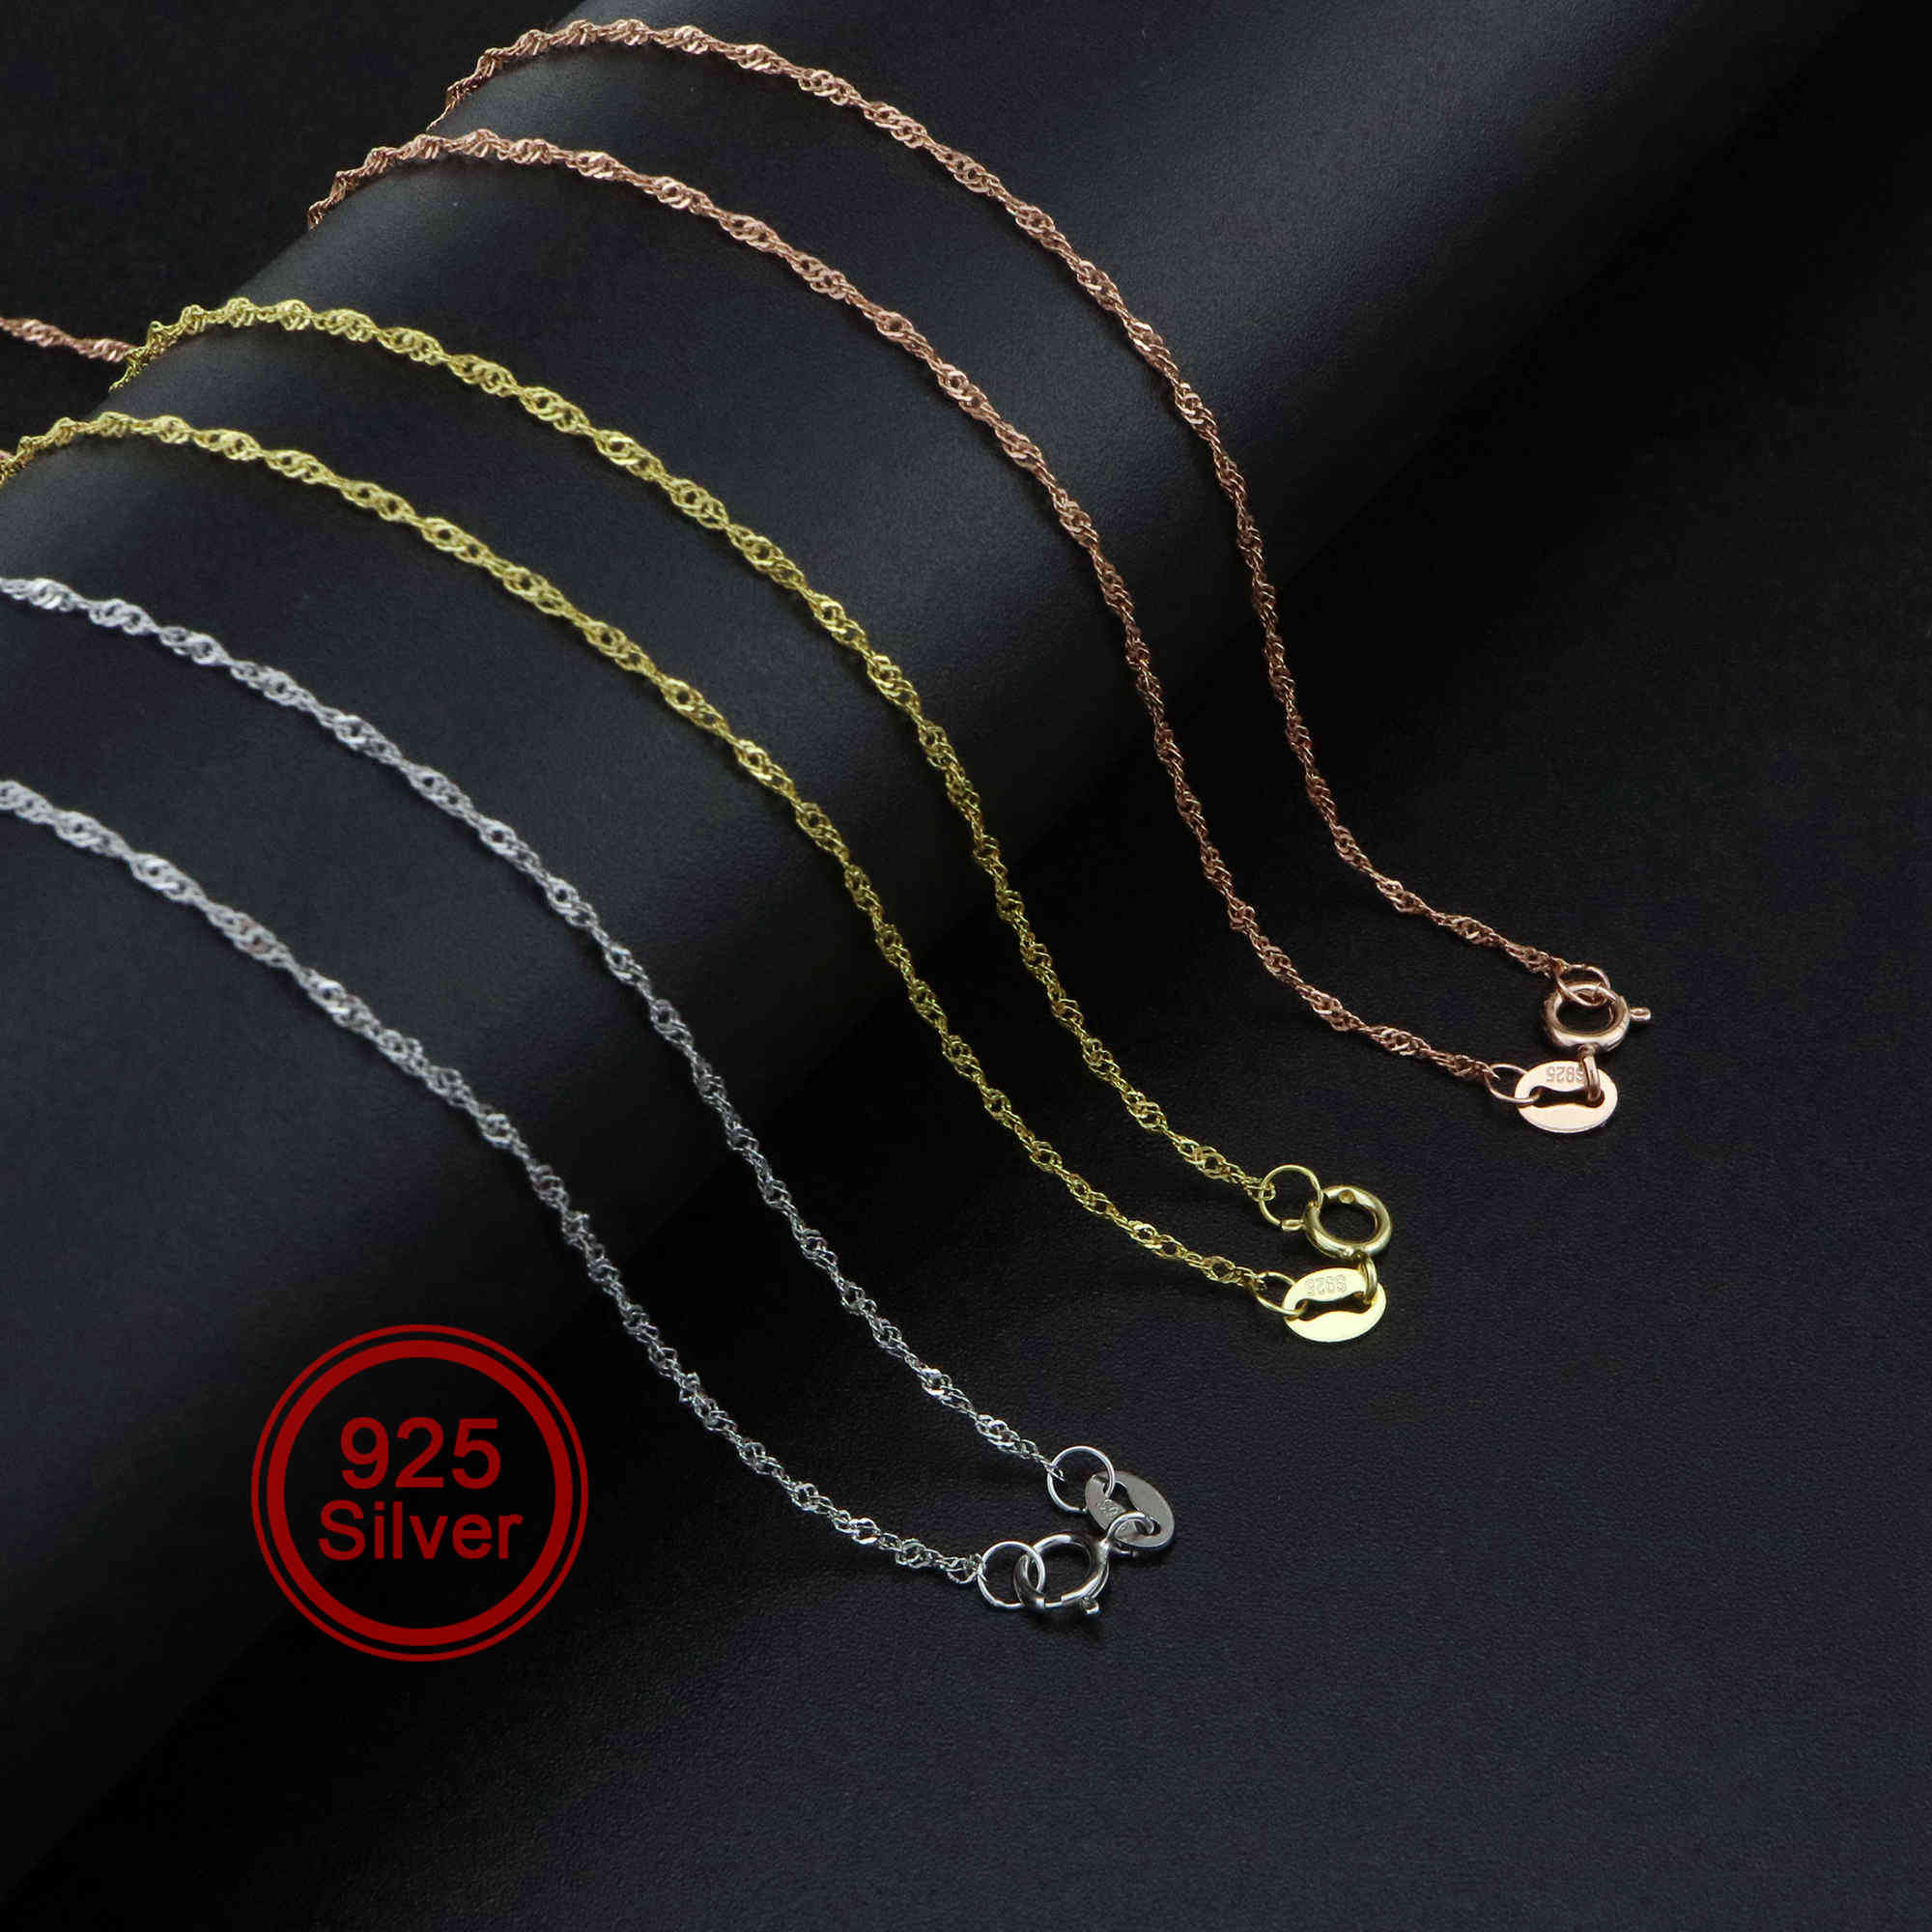 Gold Plated Surgical Steel Twisted Chain Necklace | Wide choker necklace, Chain  necklace, Waterproof jewelry